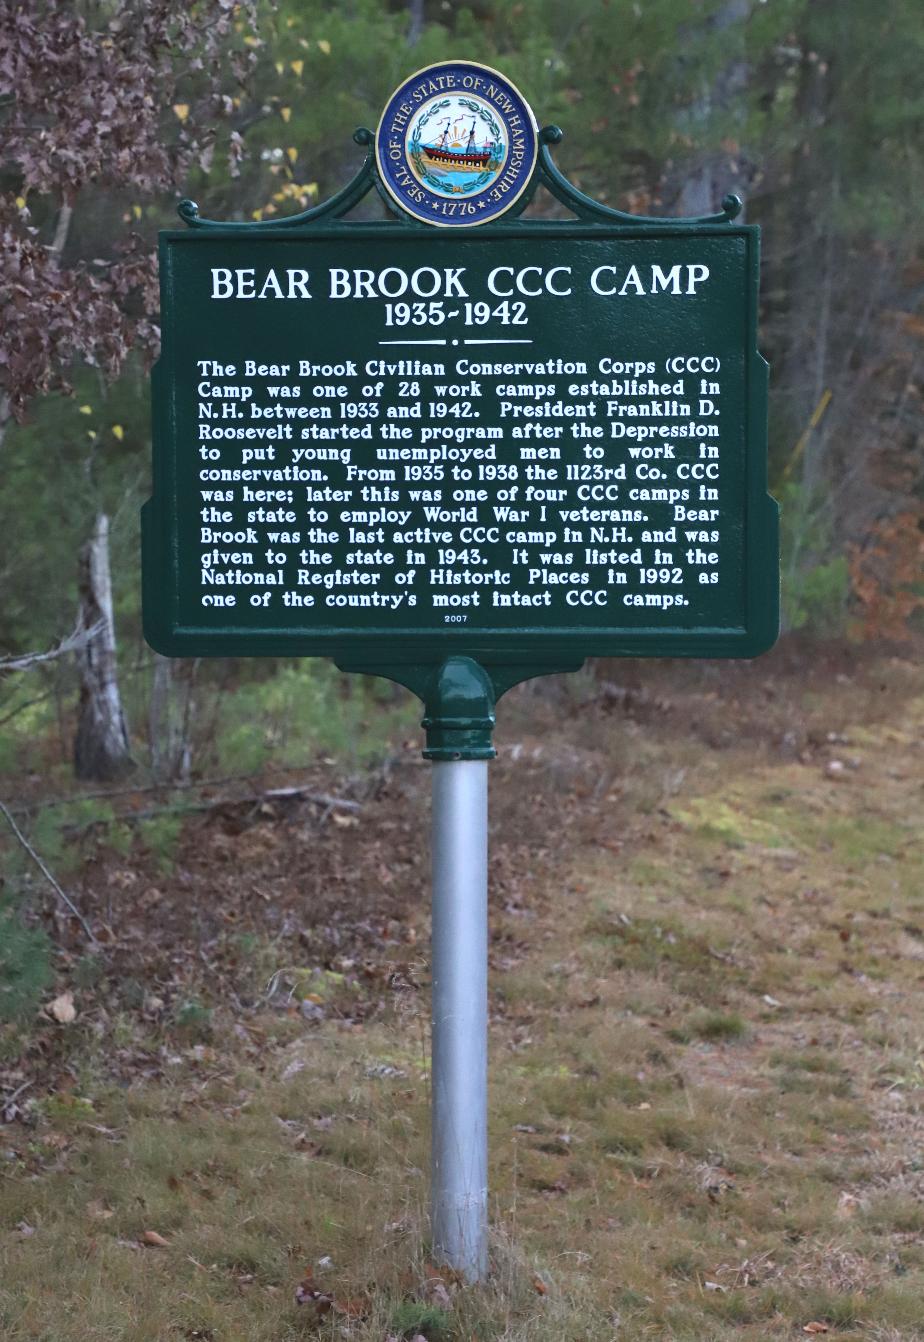 Bear Brook CCC Camp Historical Marker #205 Allenstown New Hampshire